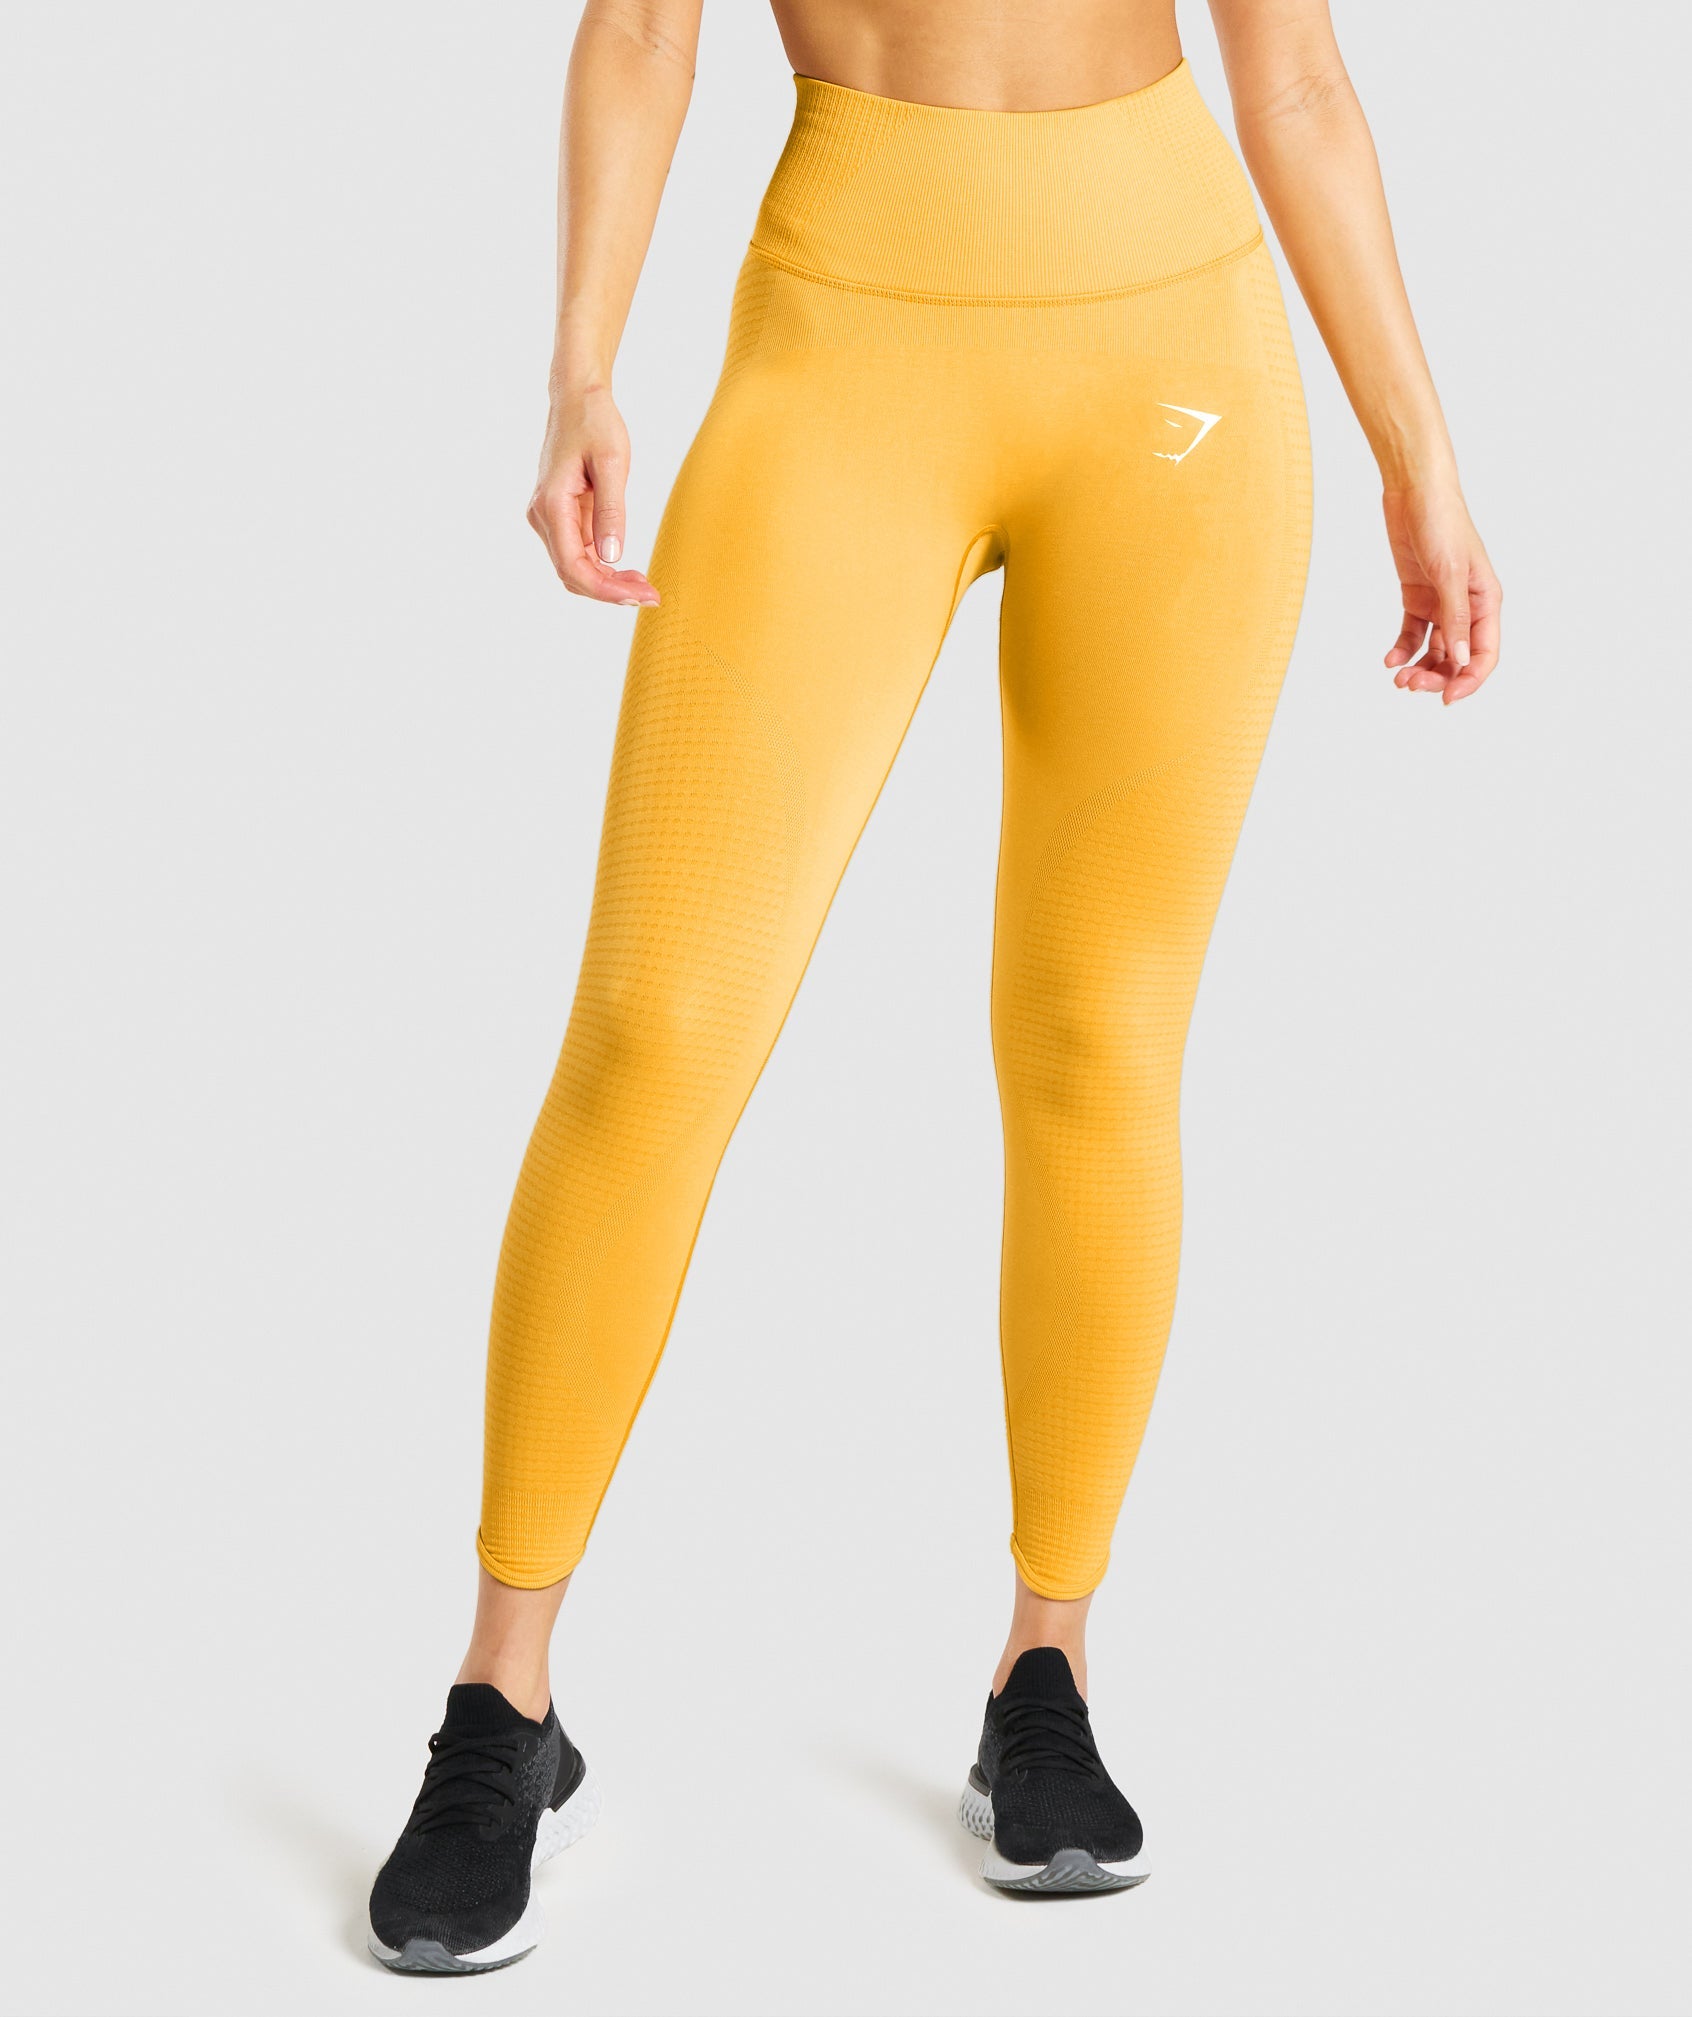 Gymshark Dreamy Leggings 2.0 - Citrus Yellow 2  Outfits with leggings,  Fitness leggings women, Yellow leggings